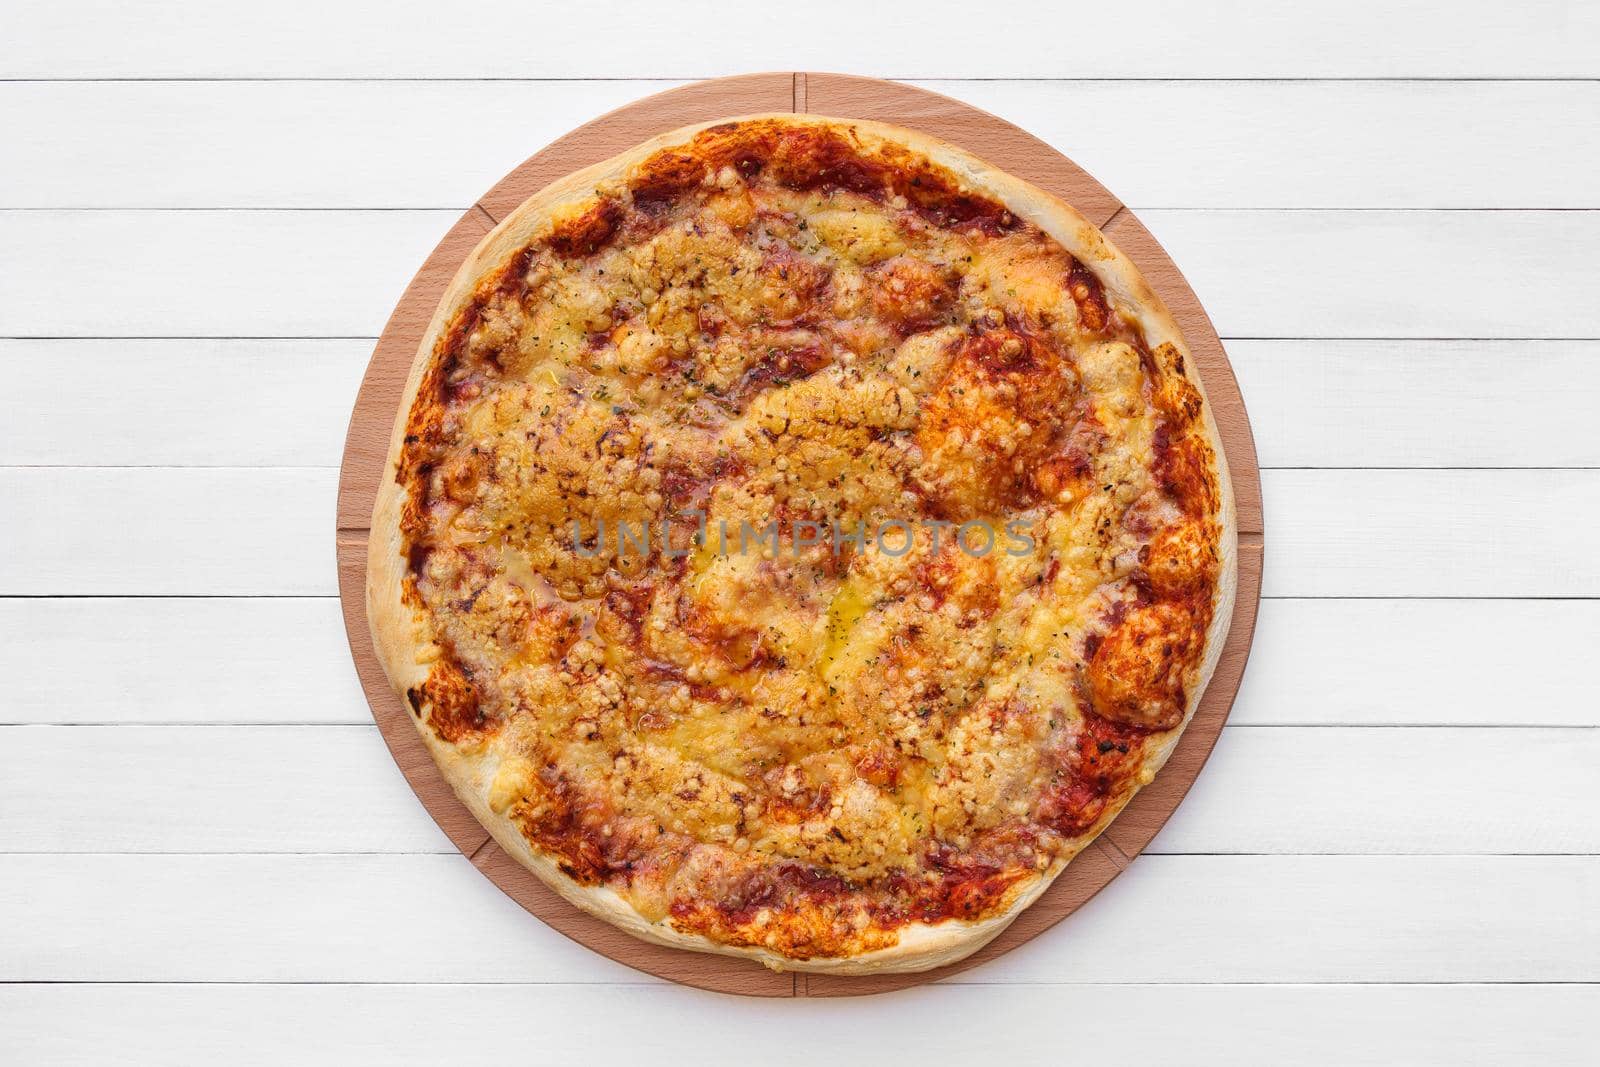 Whole round pizza topped with cheese and oregano on wooden plate. Top view on white board background. Copy space.